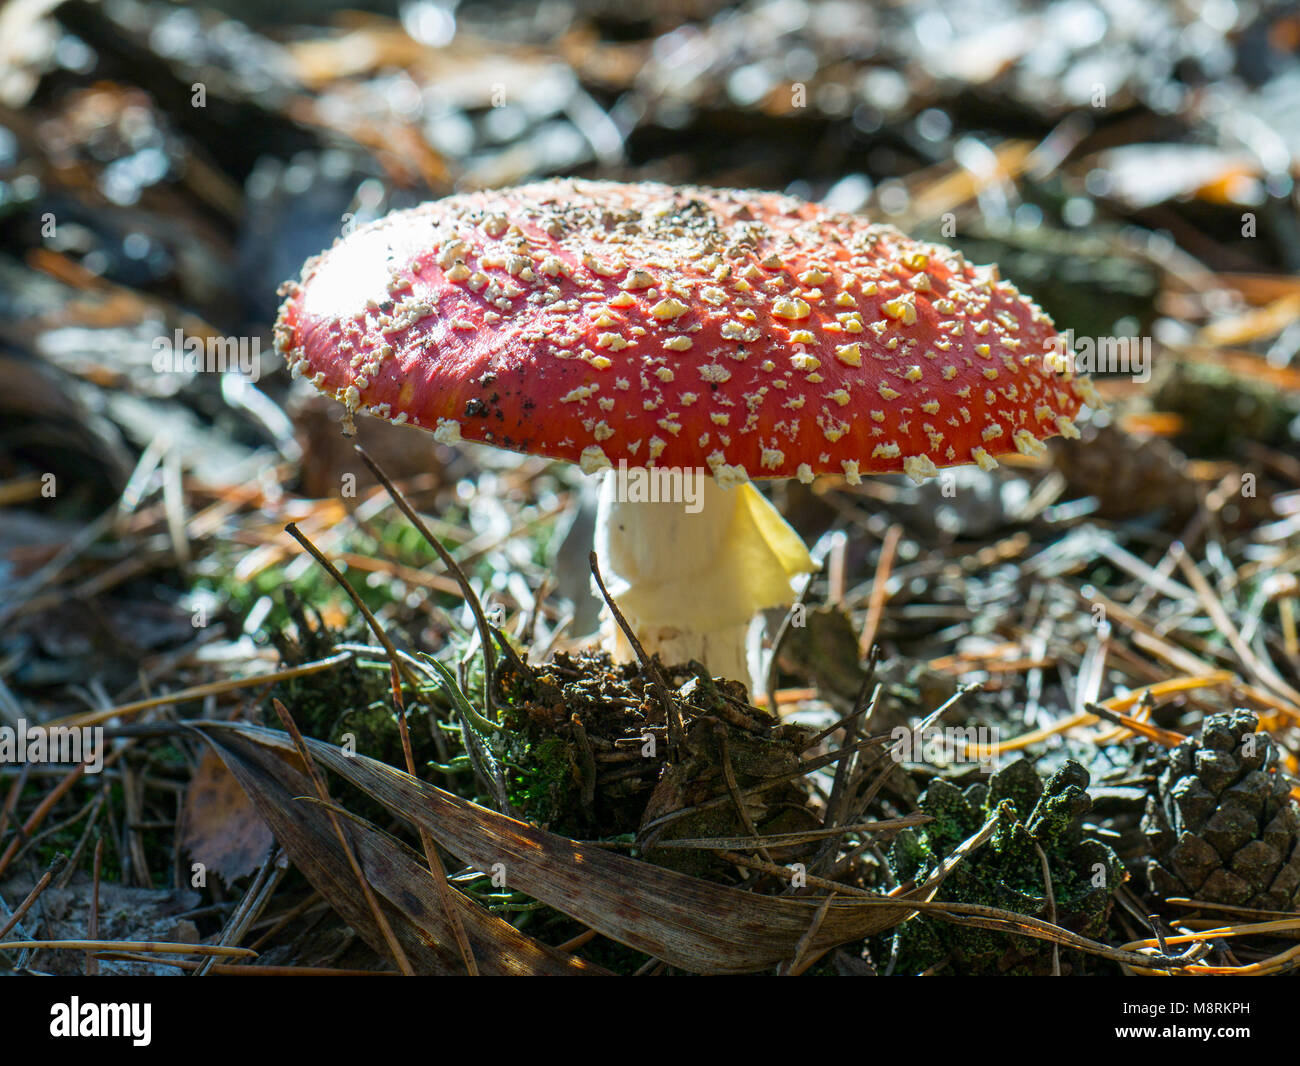 Amanita muscaria, commonly known as the fly agaric or fly amanita, is a mushroom and psychoactive basidiomycete fungus, one of many in the genus Amani Stock Photo